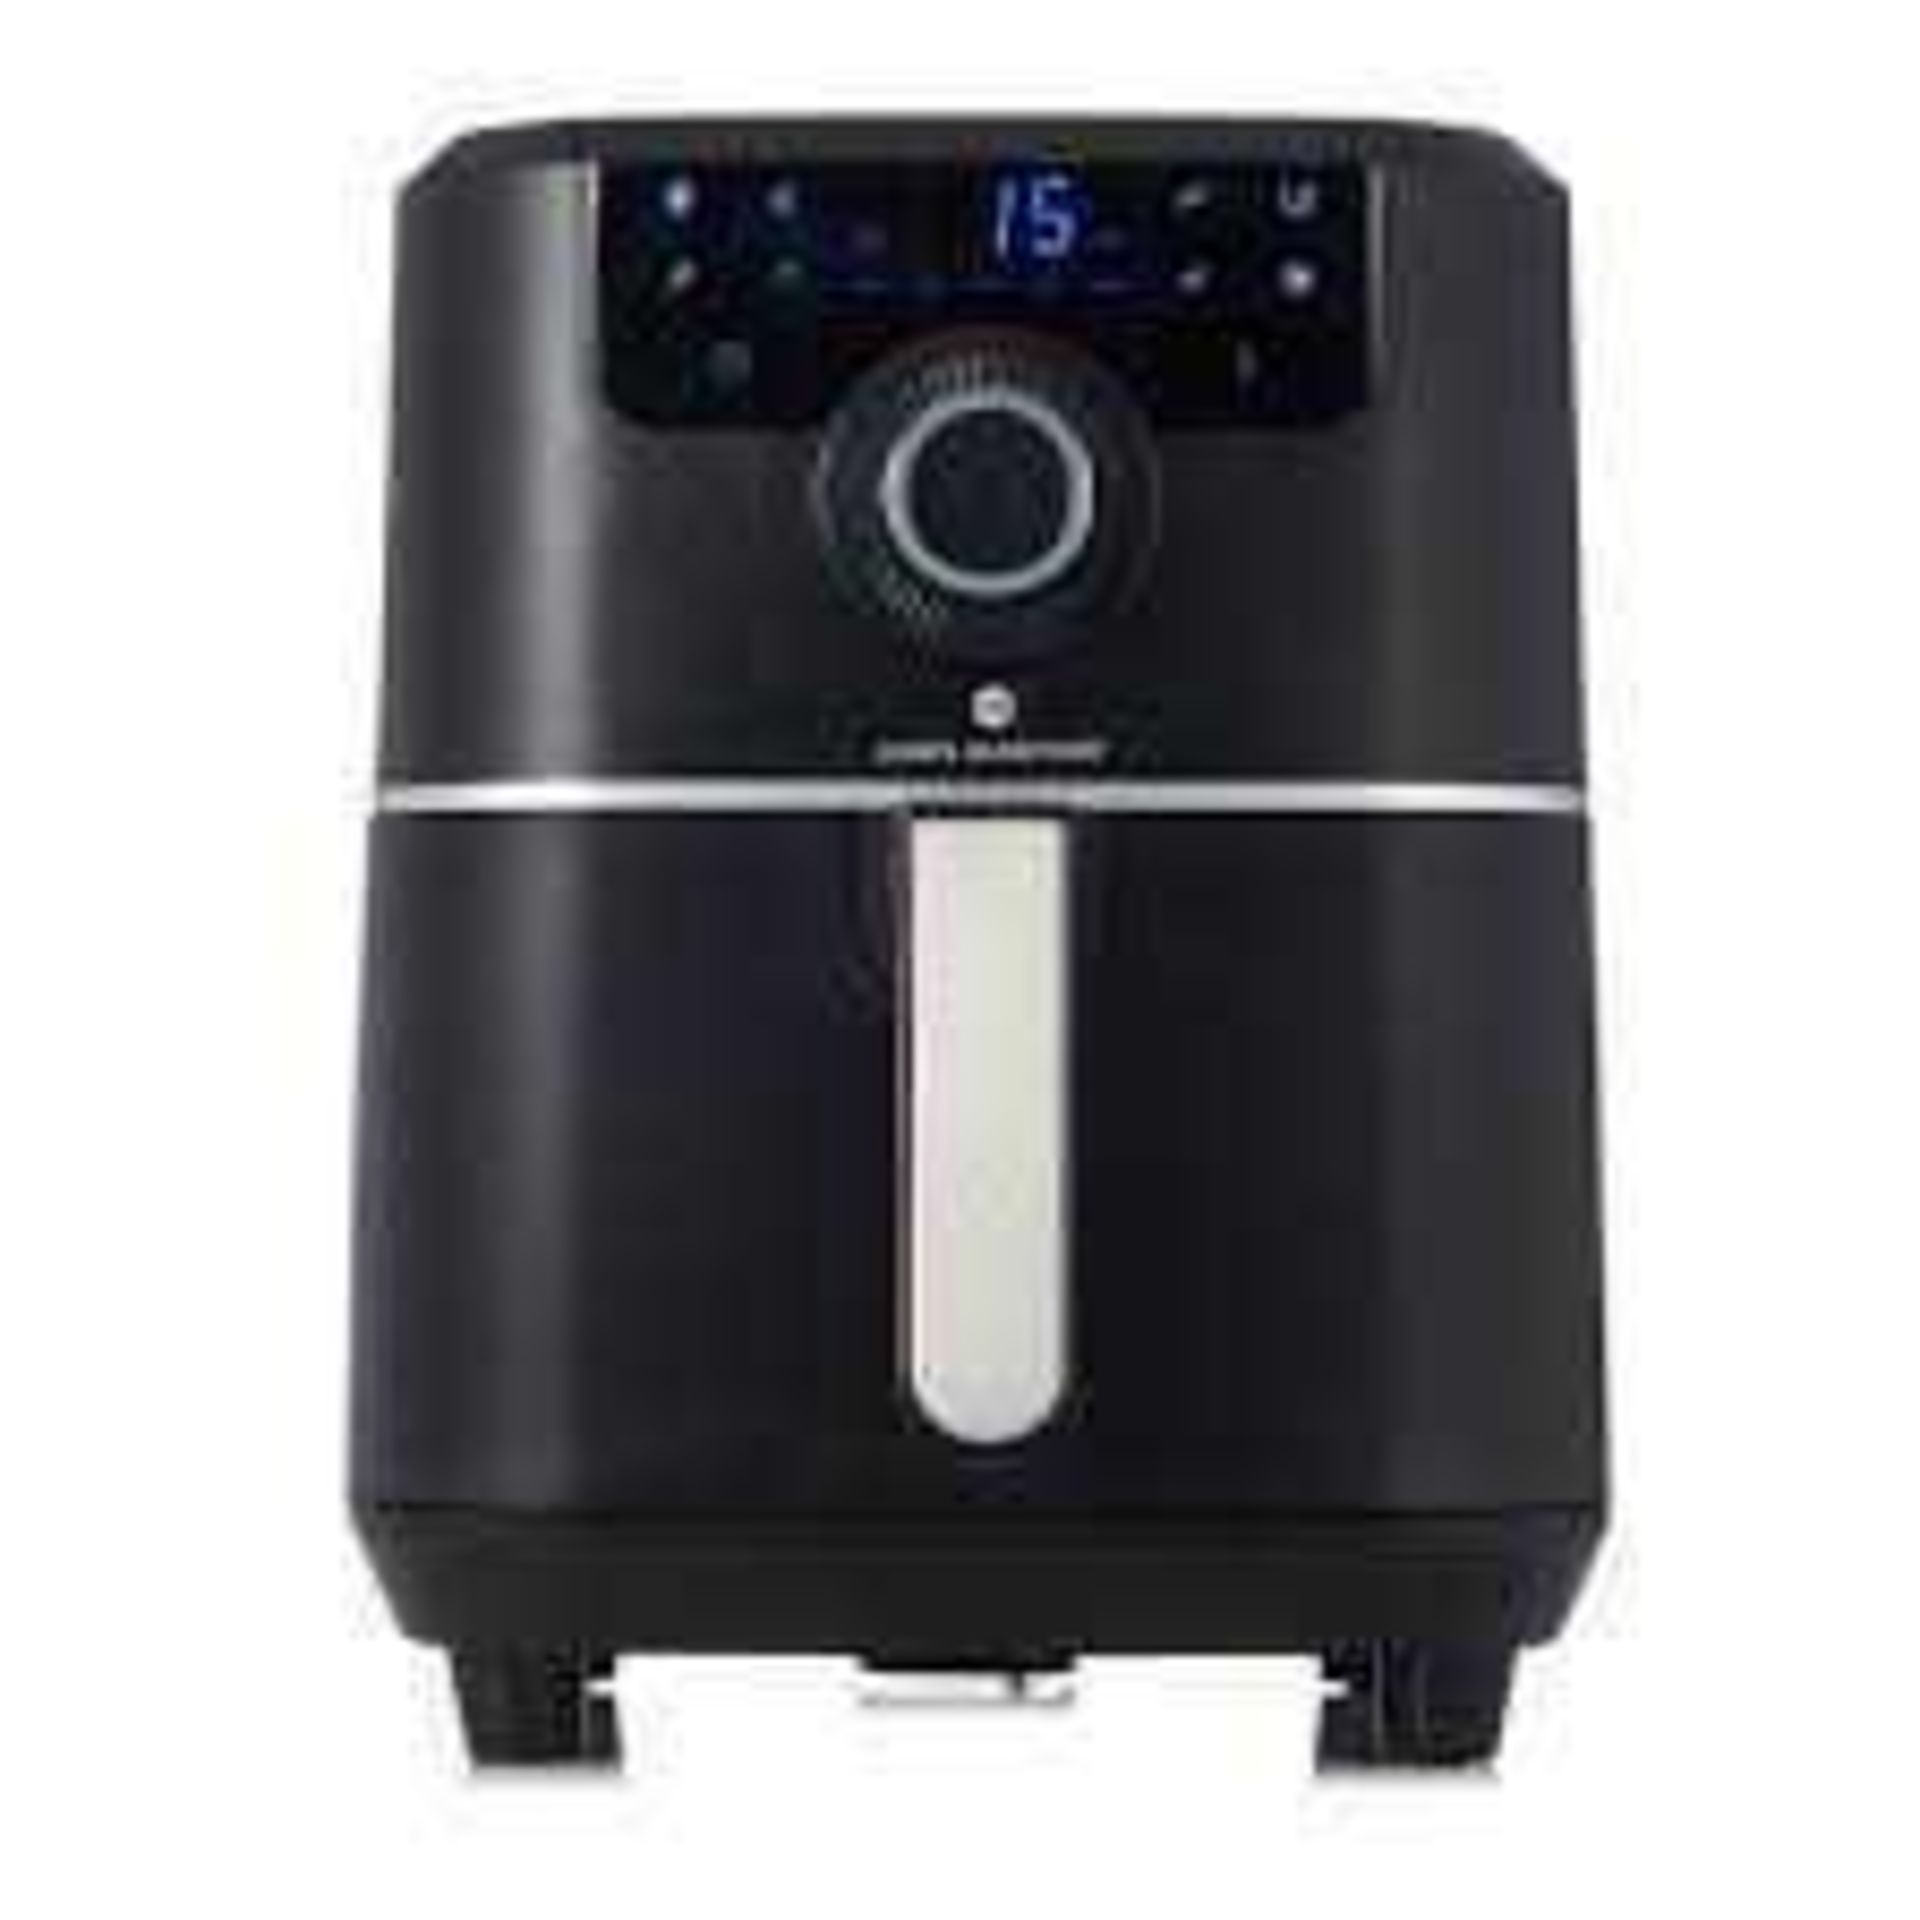 RRP £70 Boxed Cooks Essential Large Capacity Air Fryer (Appraisals Available On Request) (Pictures